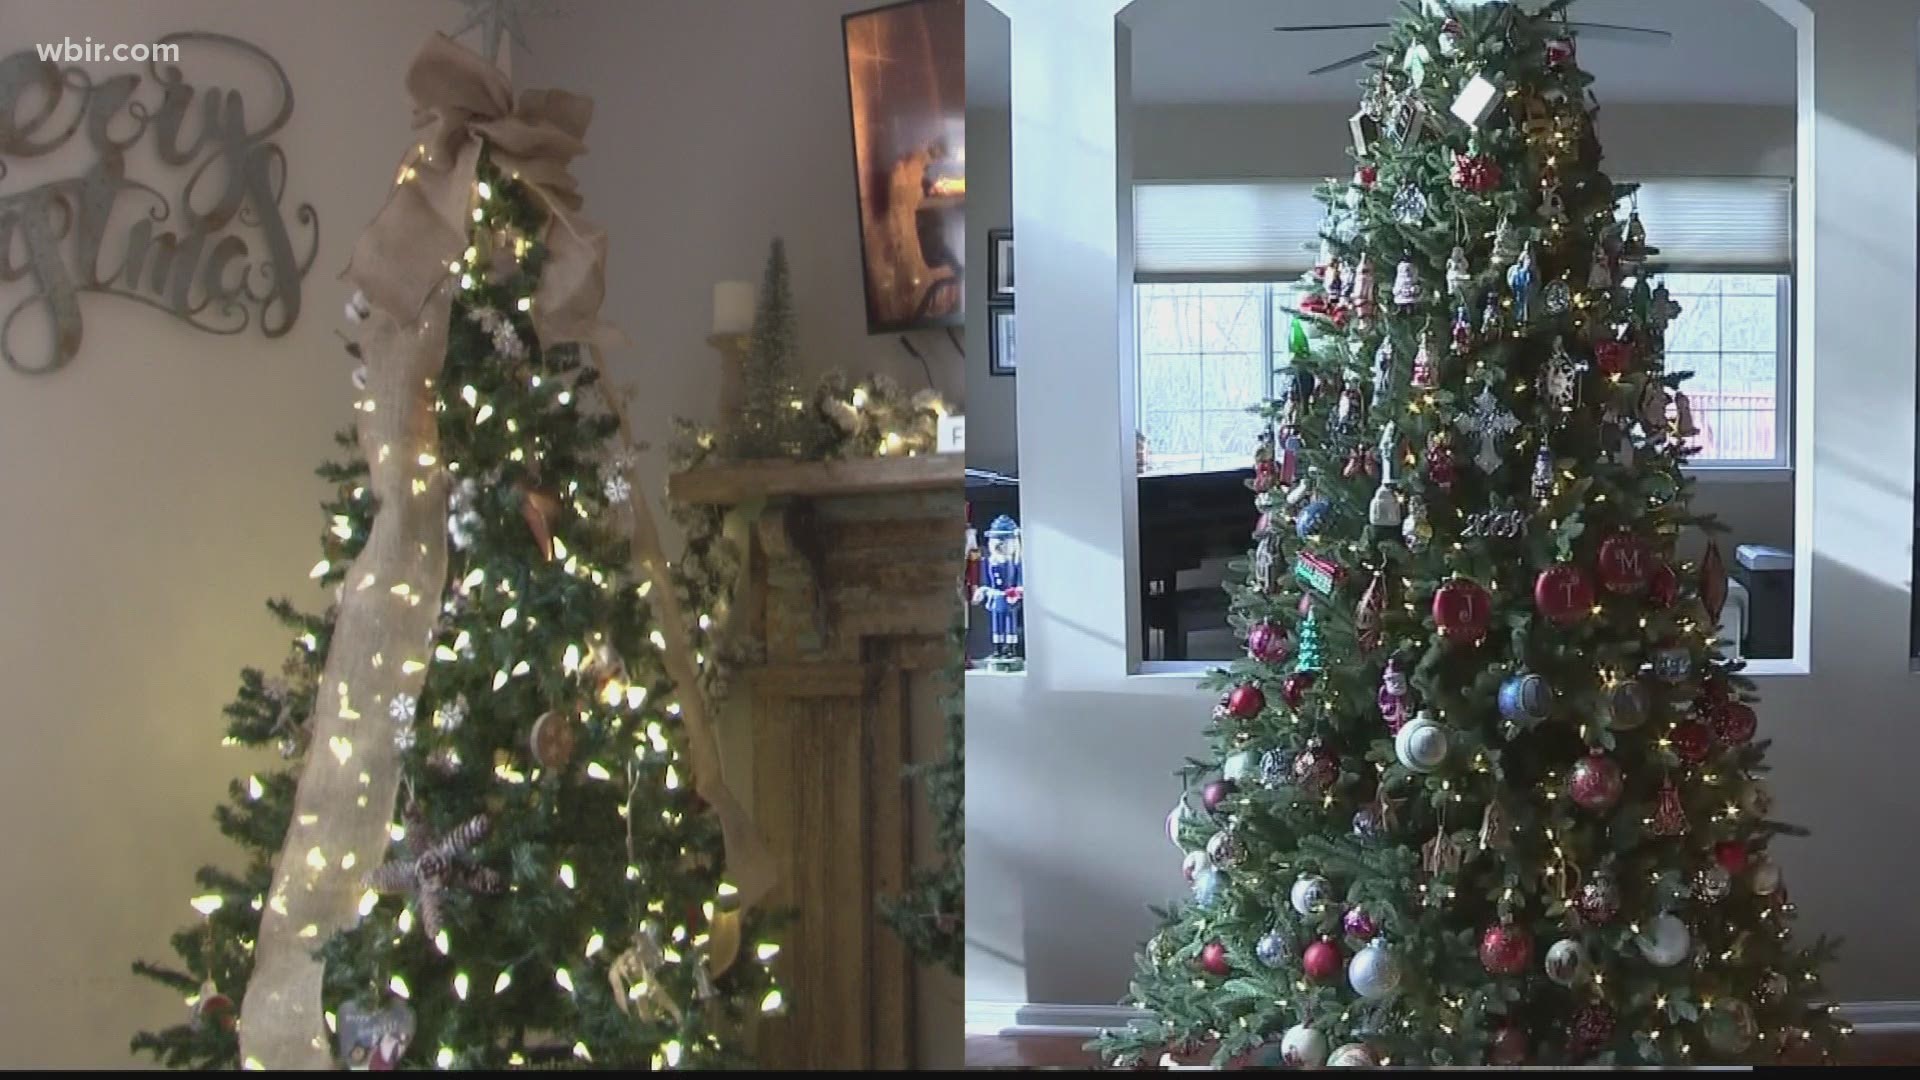 The retail federation says people are spending more on Christmas decorations and less on gifts than in years past.